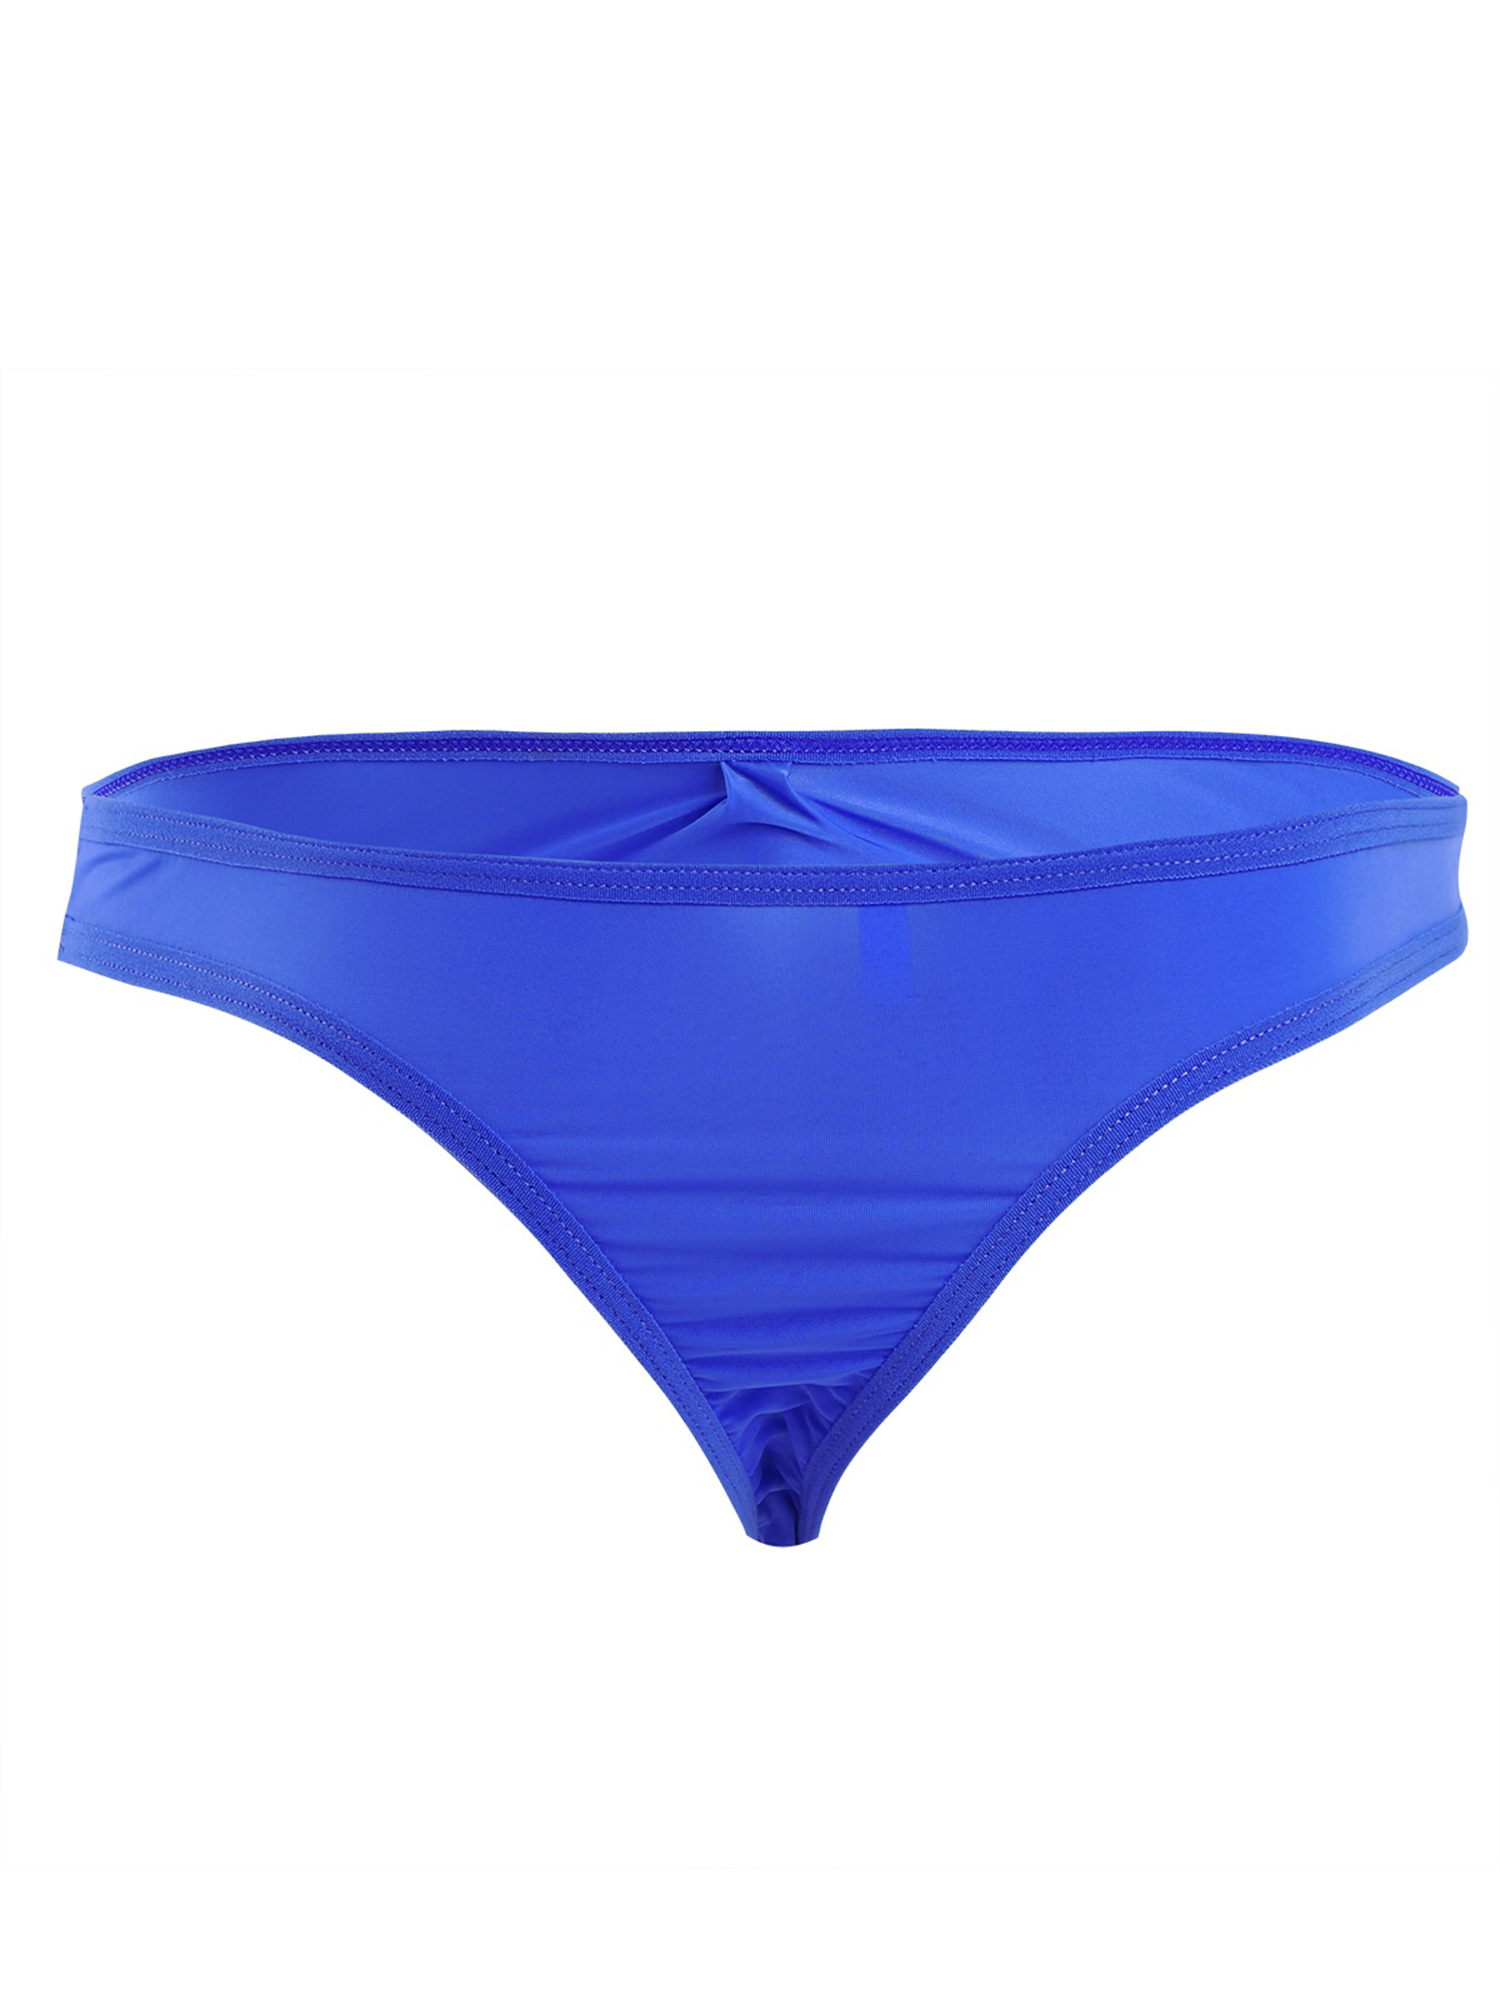 Shiny Enhance Bulge Mens Bikini Thong Briefs With Simple Pouch Ruched Skimpy  Underwear From Acadiany, $16.27